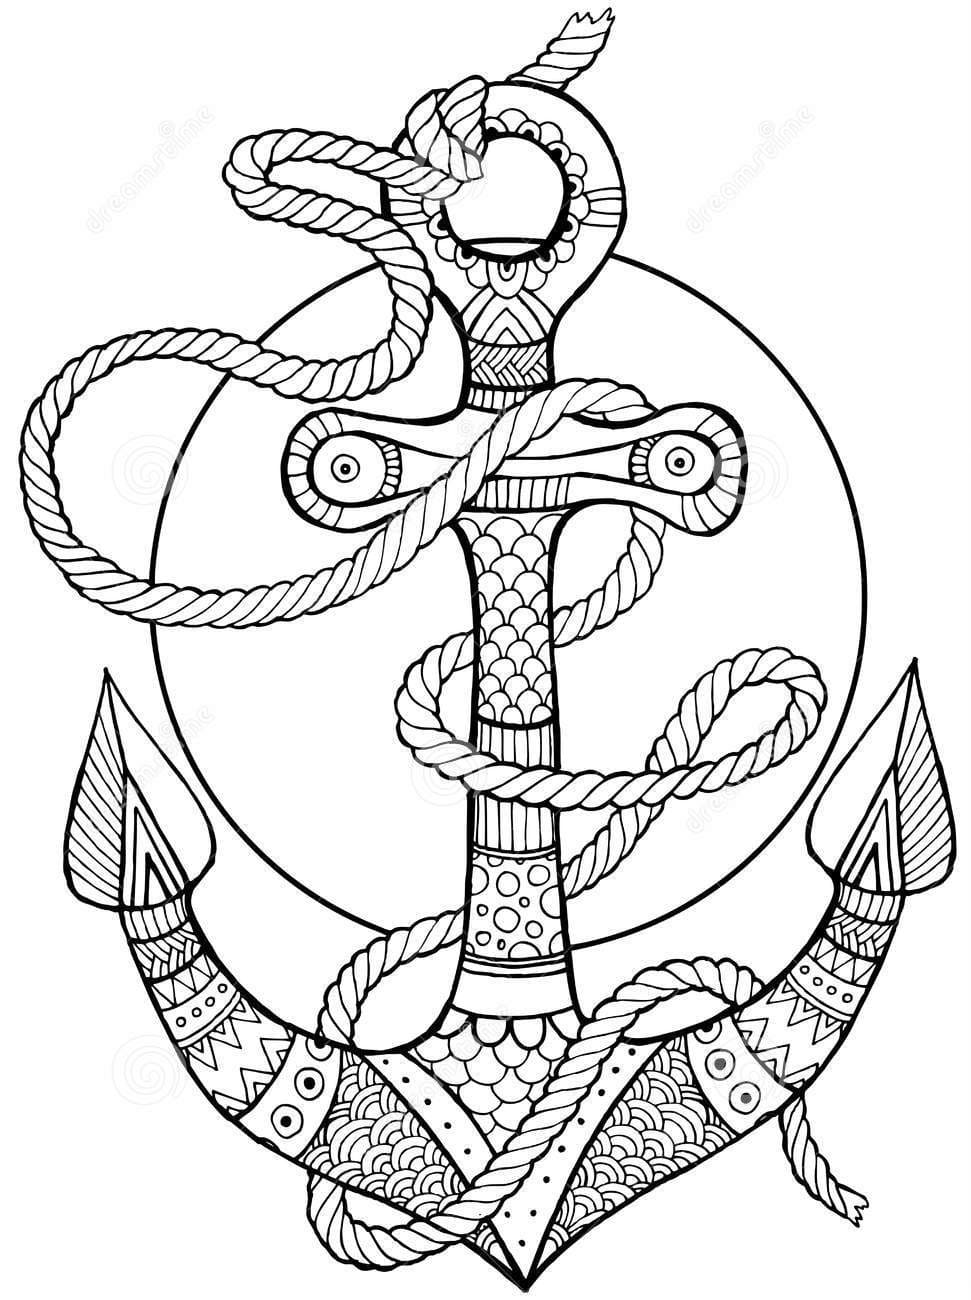 Anchor And Rope Coloring Image Coloring Page